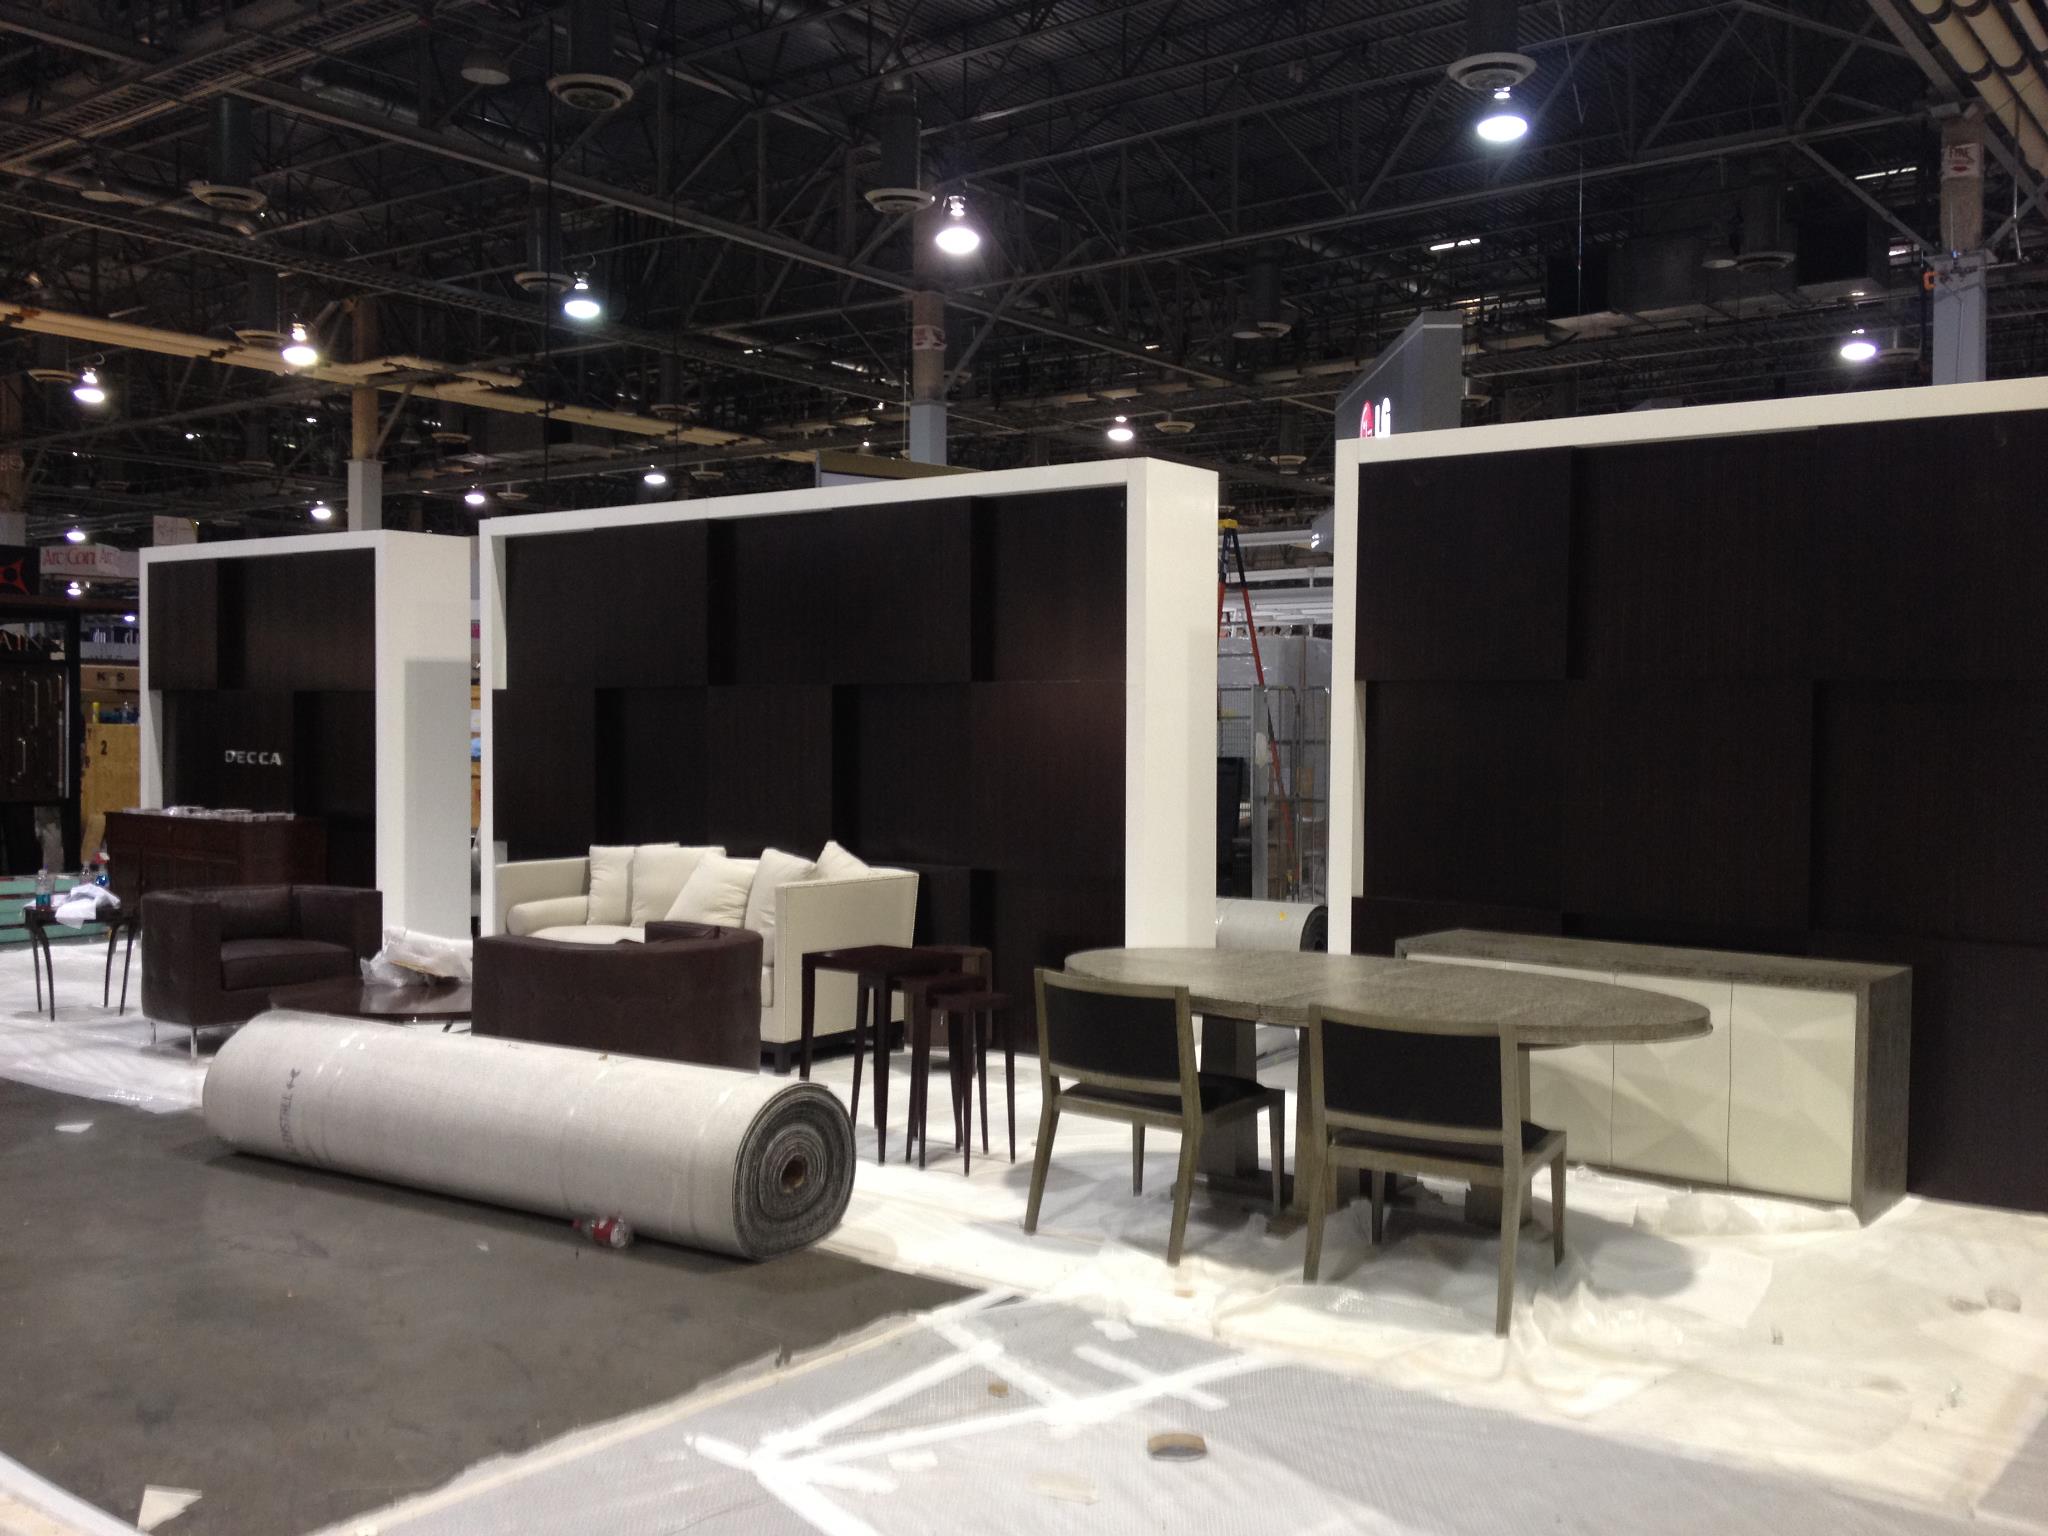 Decca booth from HD Vegas 2012